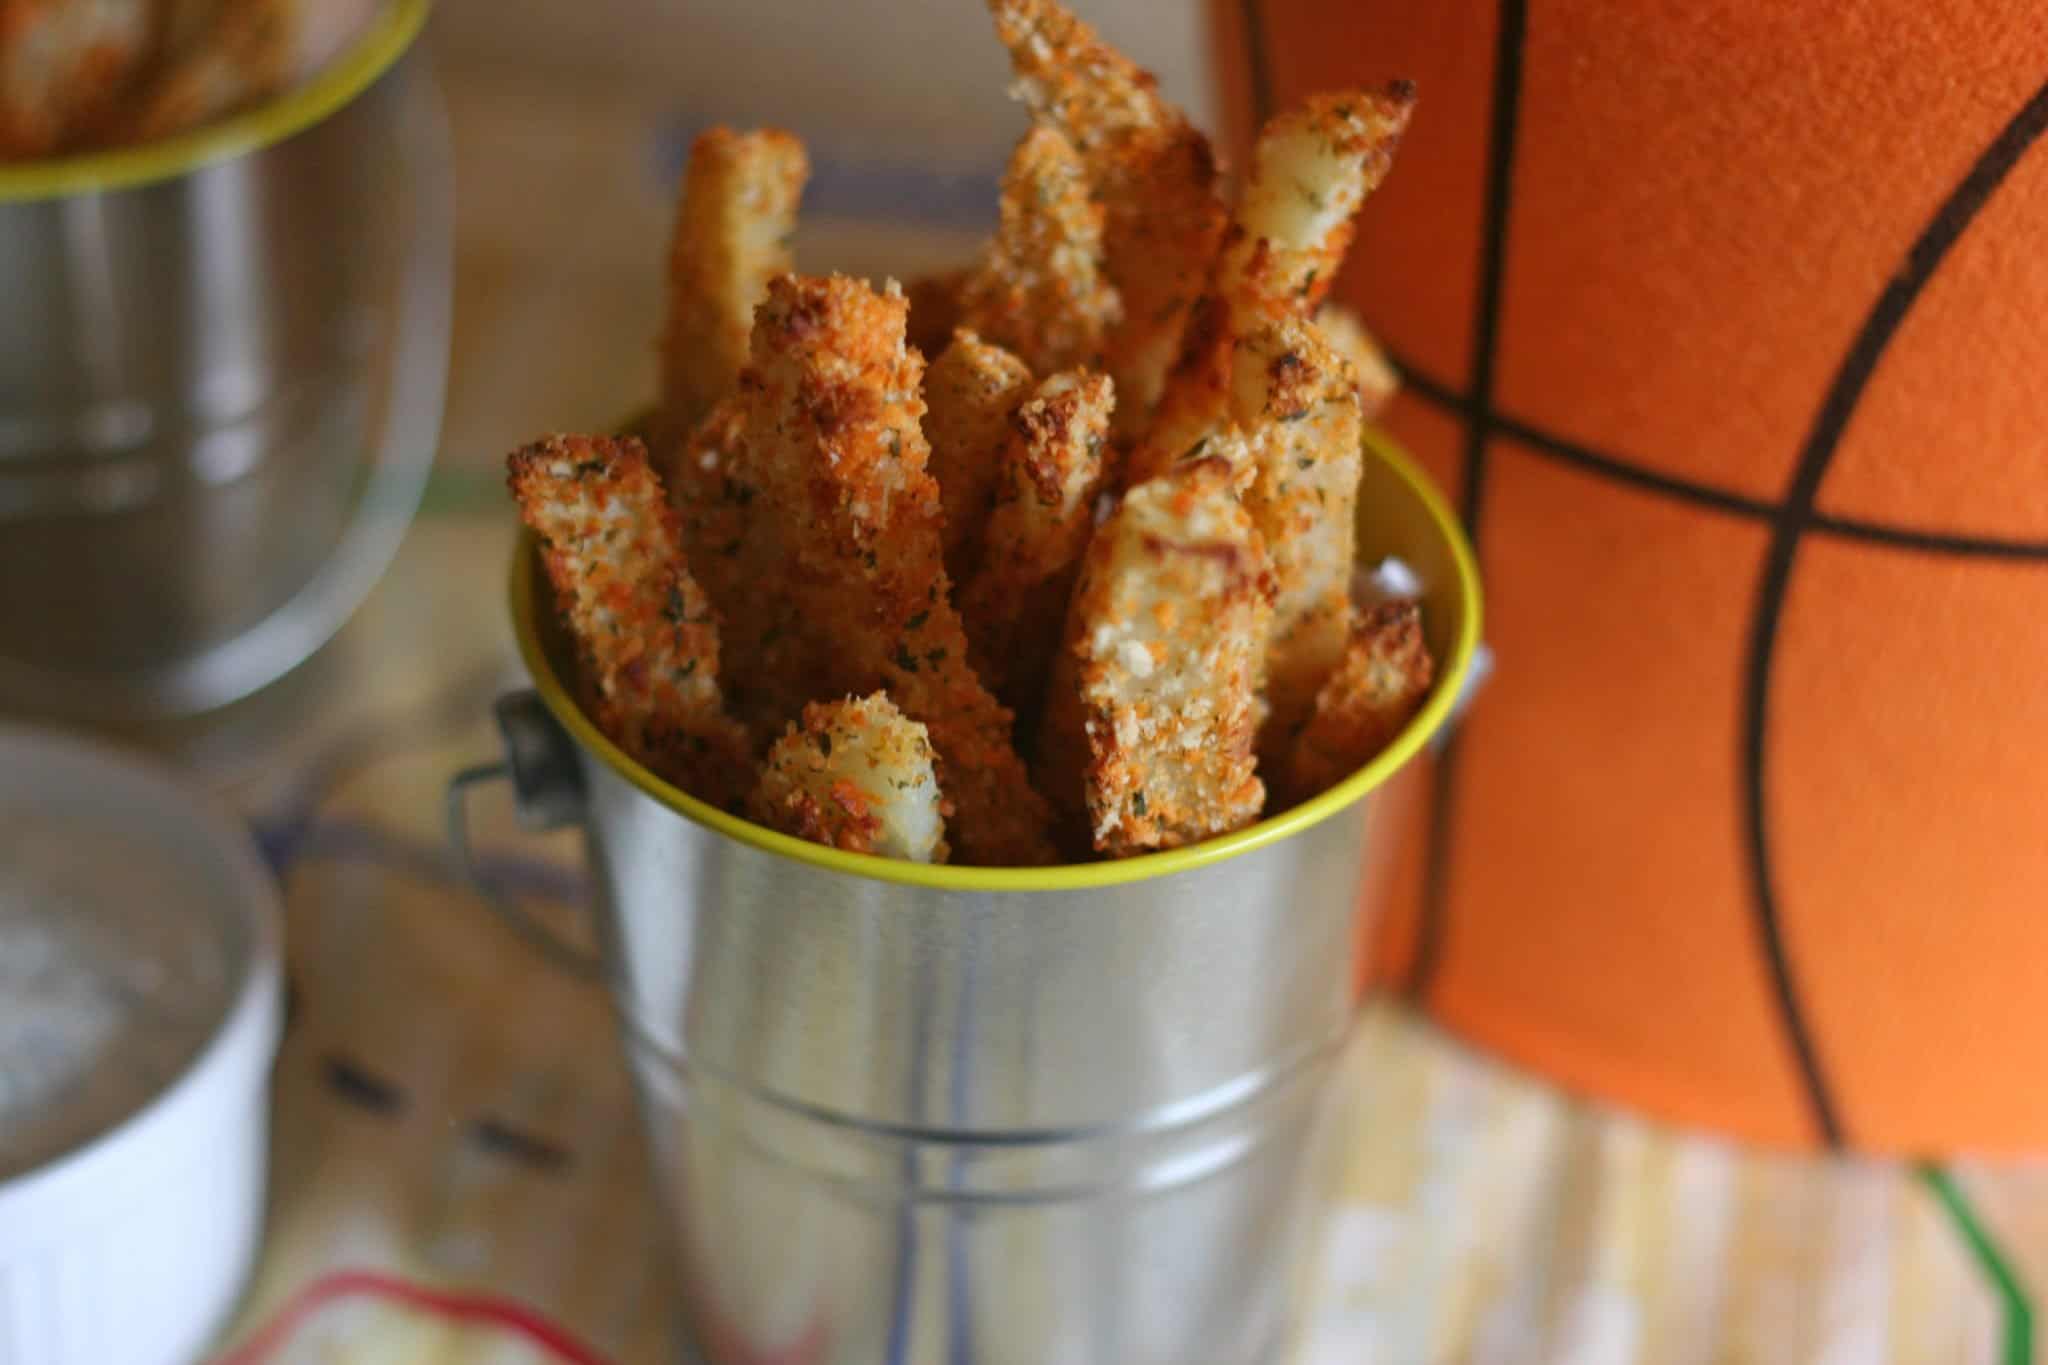 baked spicy french fries